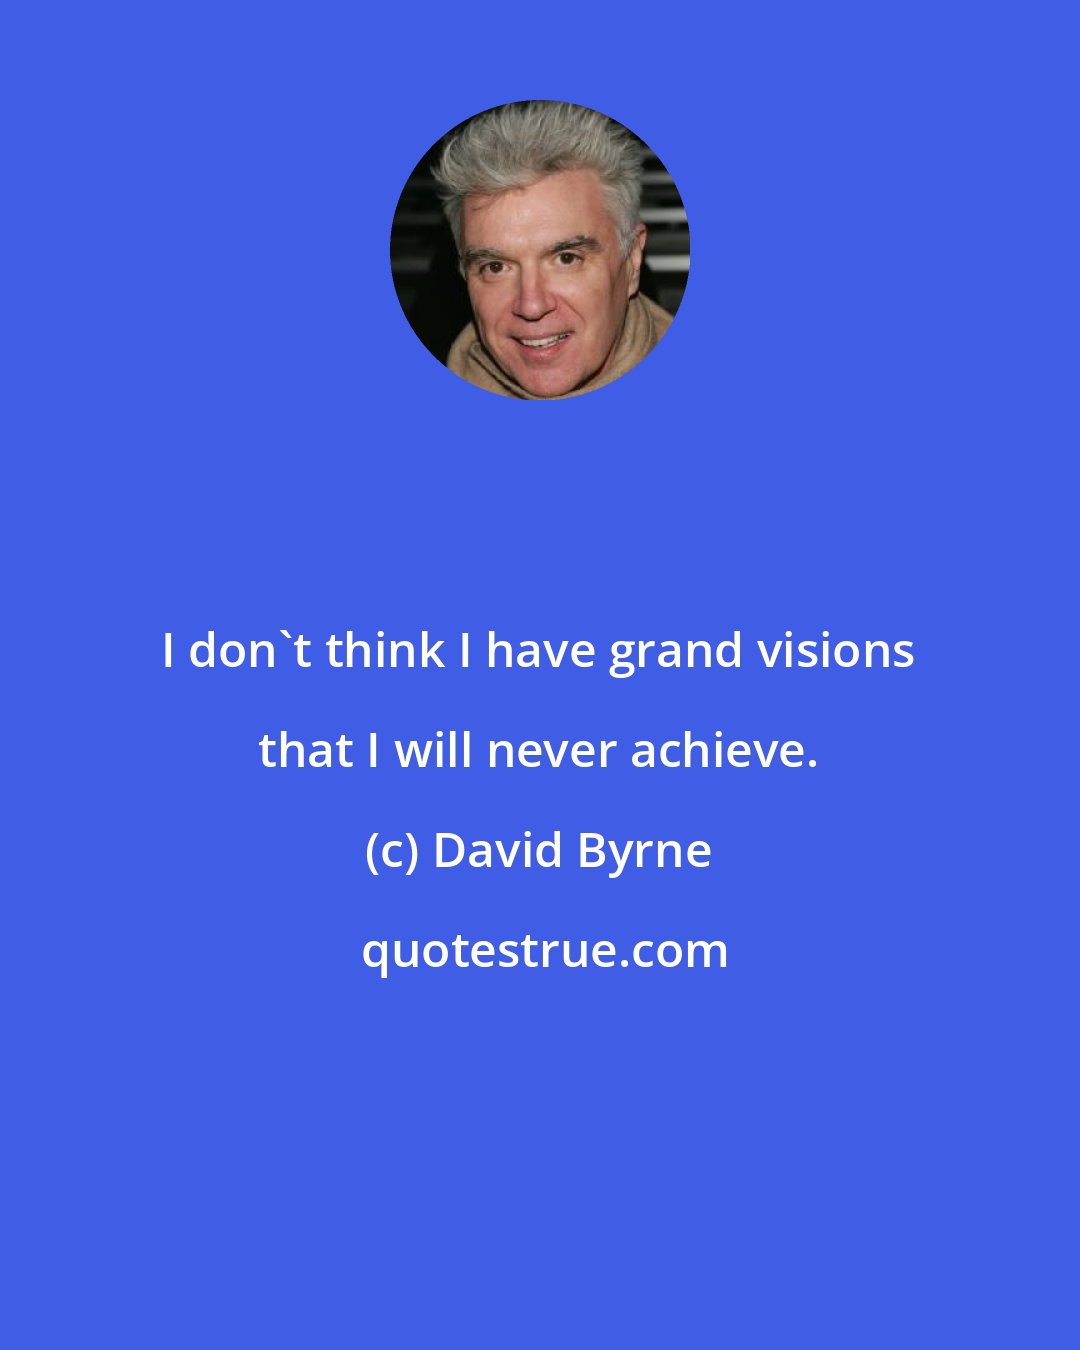 David Byrne: I don't think I have grand visions that I will never achieve.